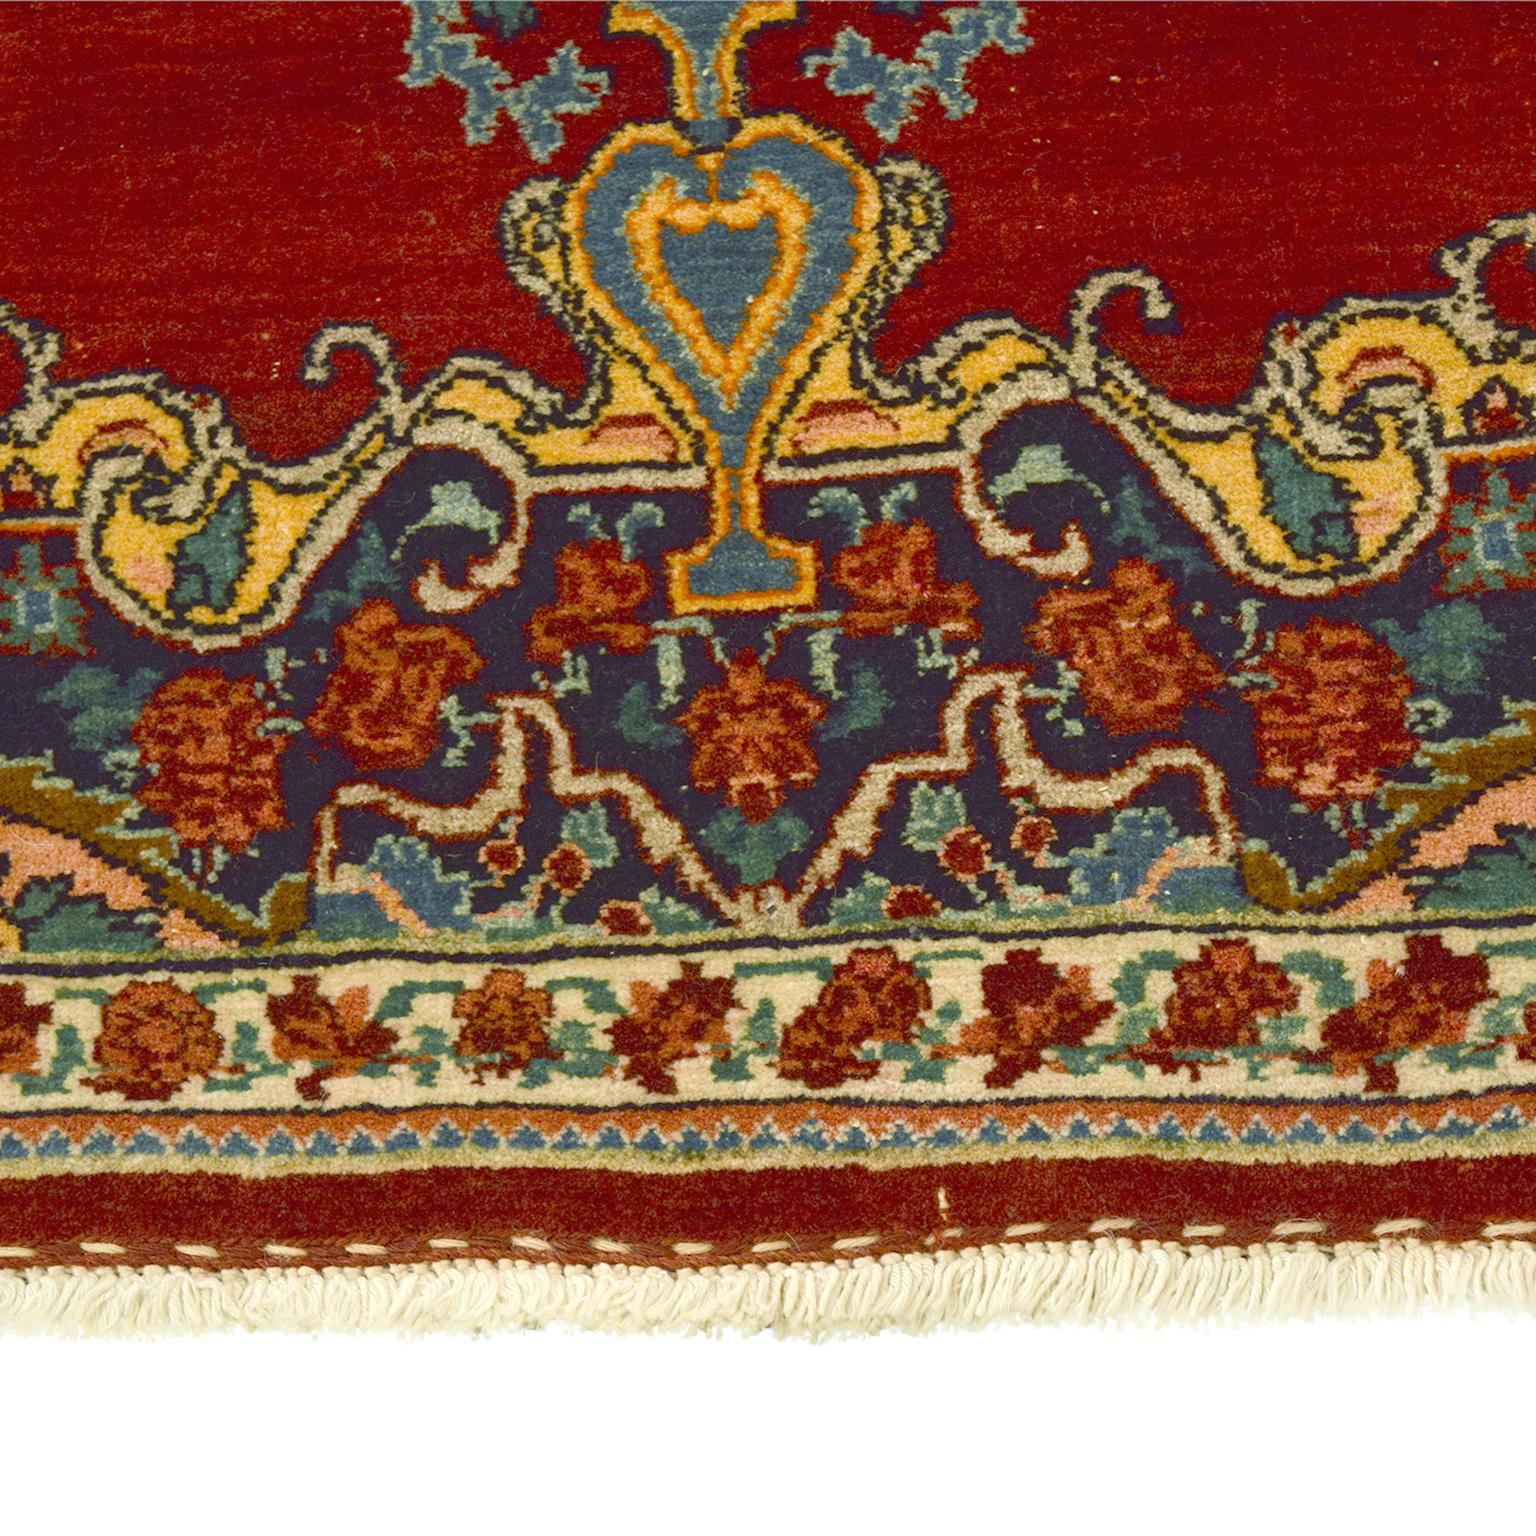 20th Century Antique Formal 1900s Persian Bidjar Rug in Red, Blue, and Gold, 4' x 6' For Sale